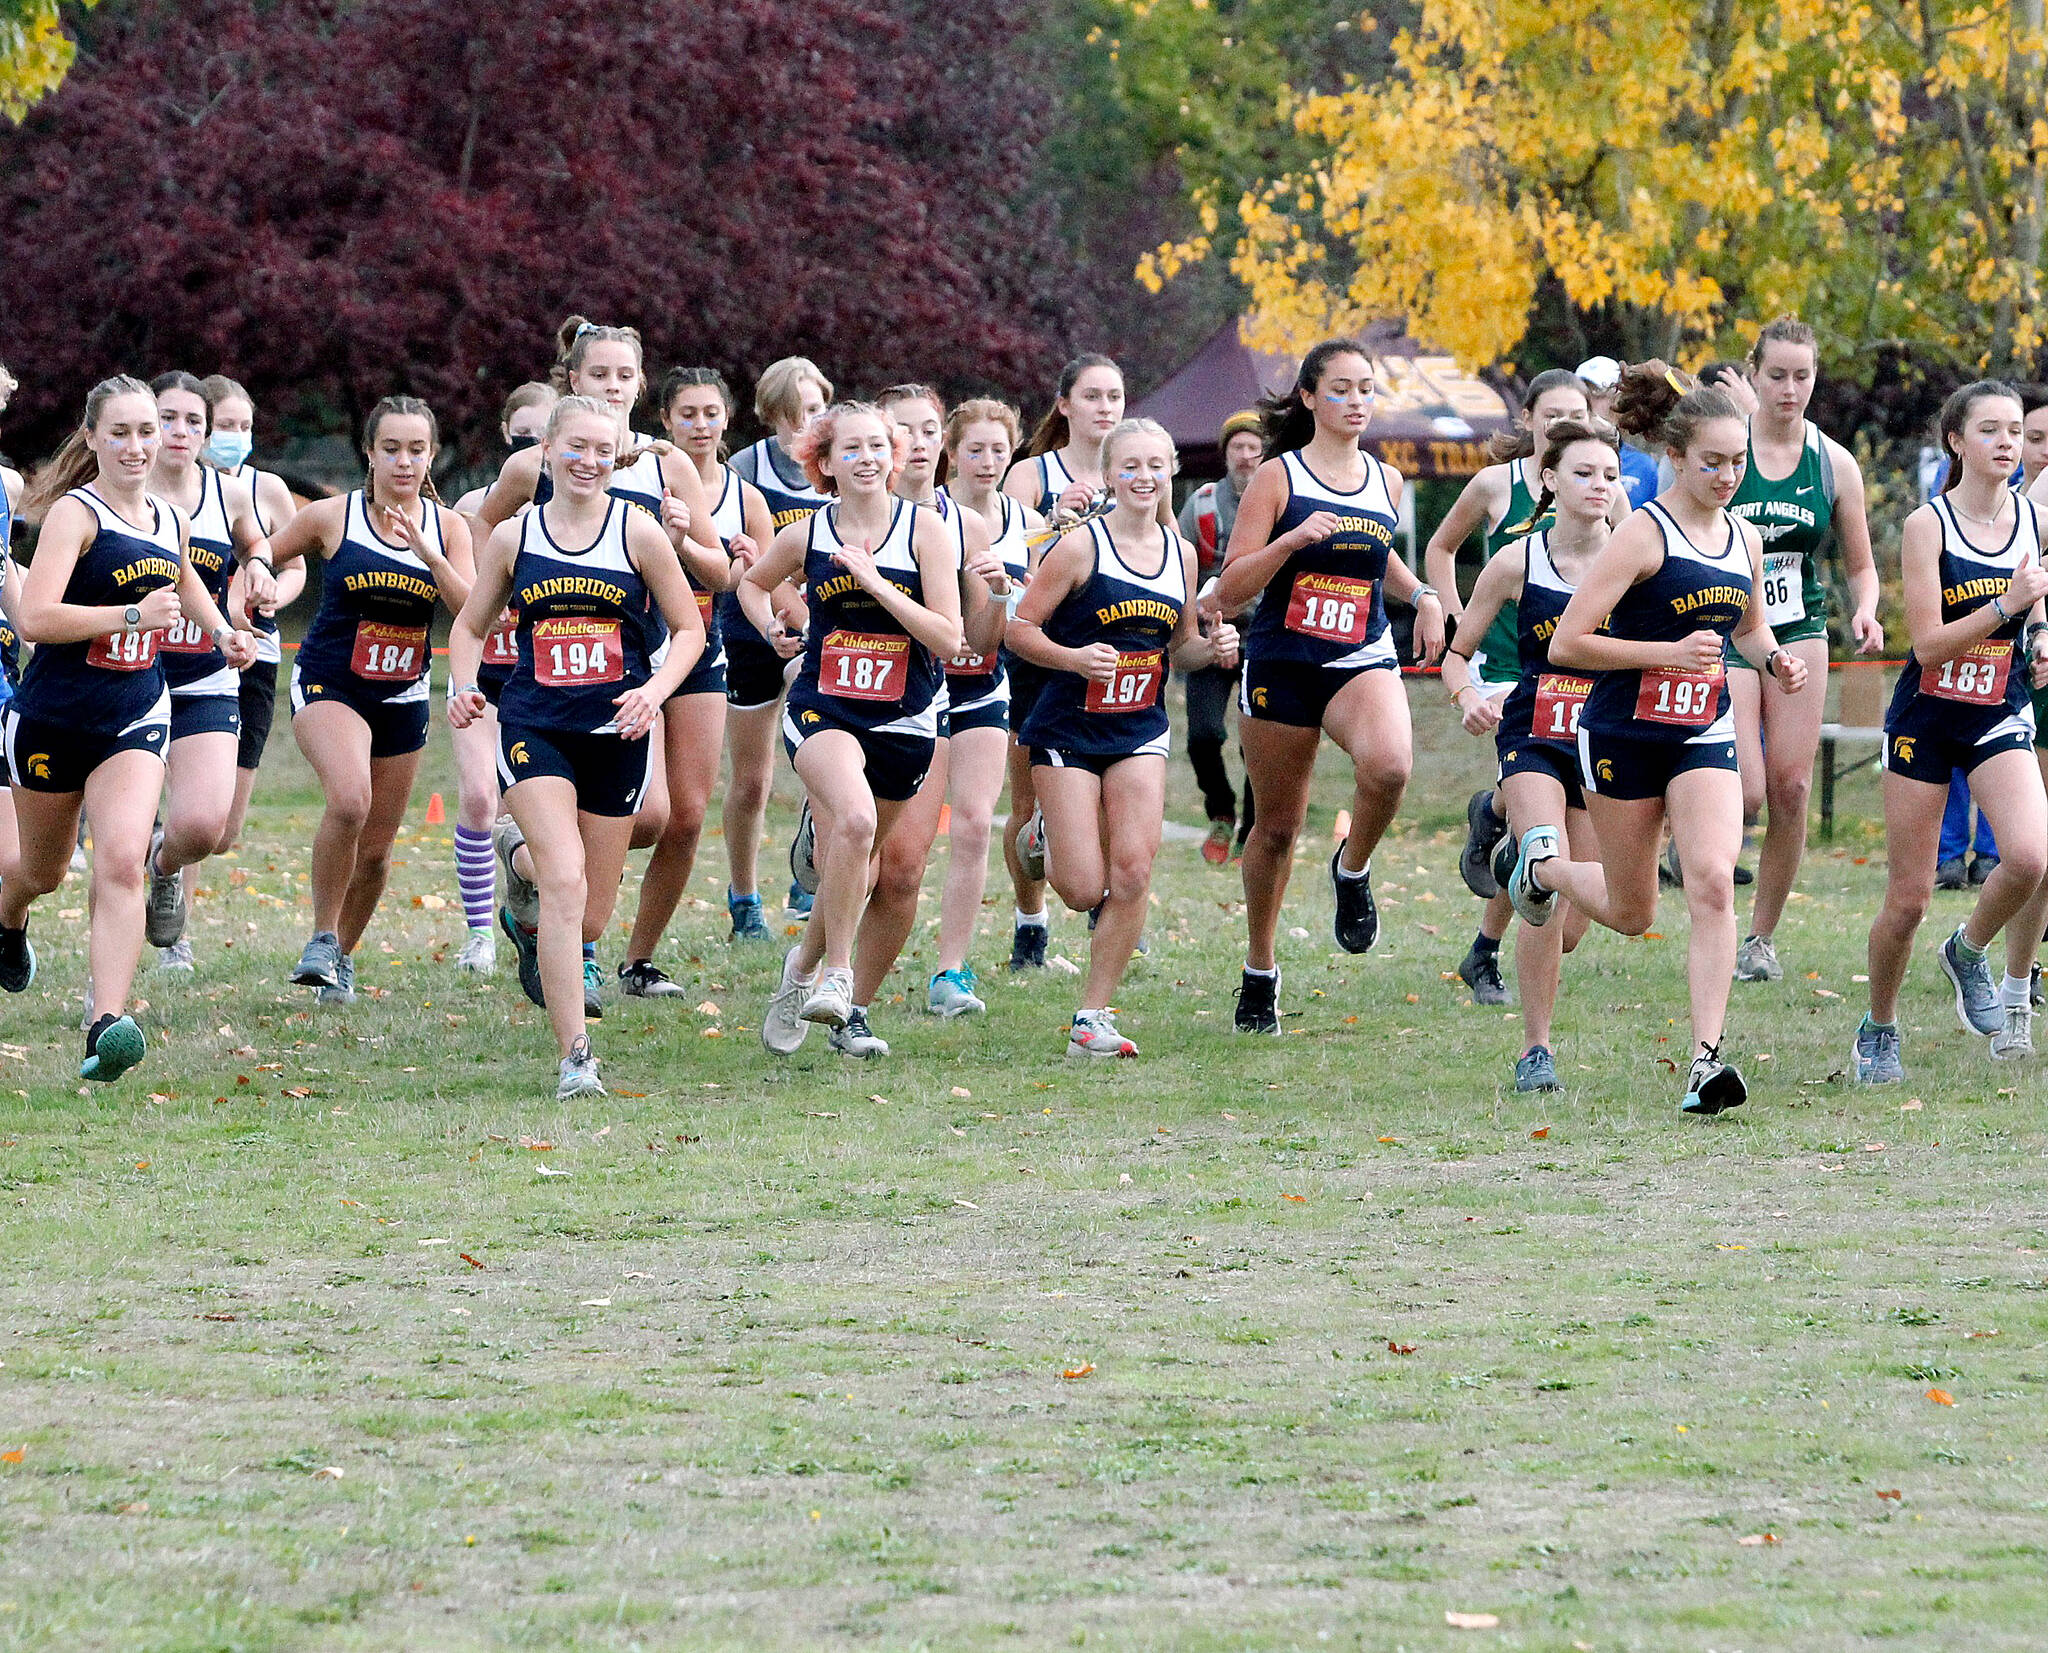 Review file photo 
The Bainbridge HS girls cross country team, shown here taking off during a league meet at Battle Point Park, took home the Olympic League championship last week.